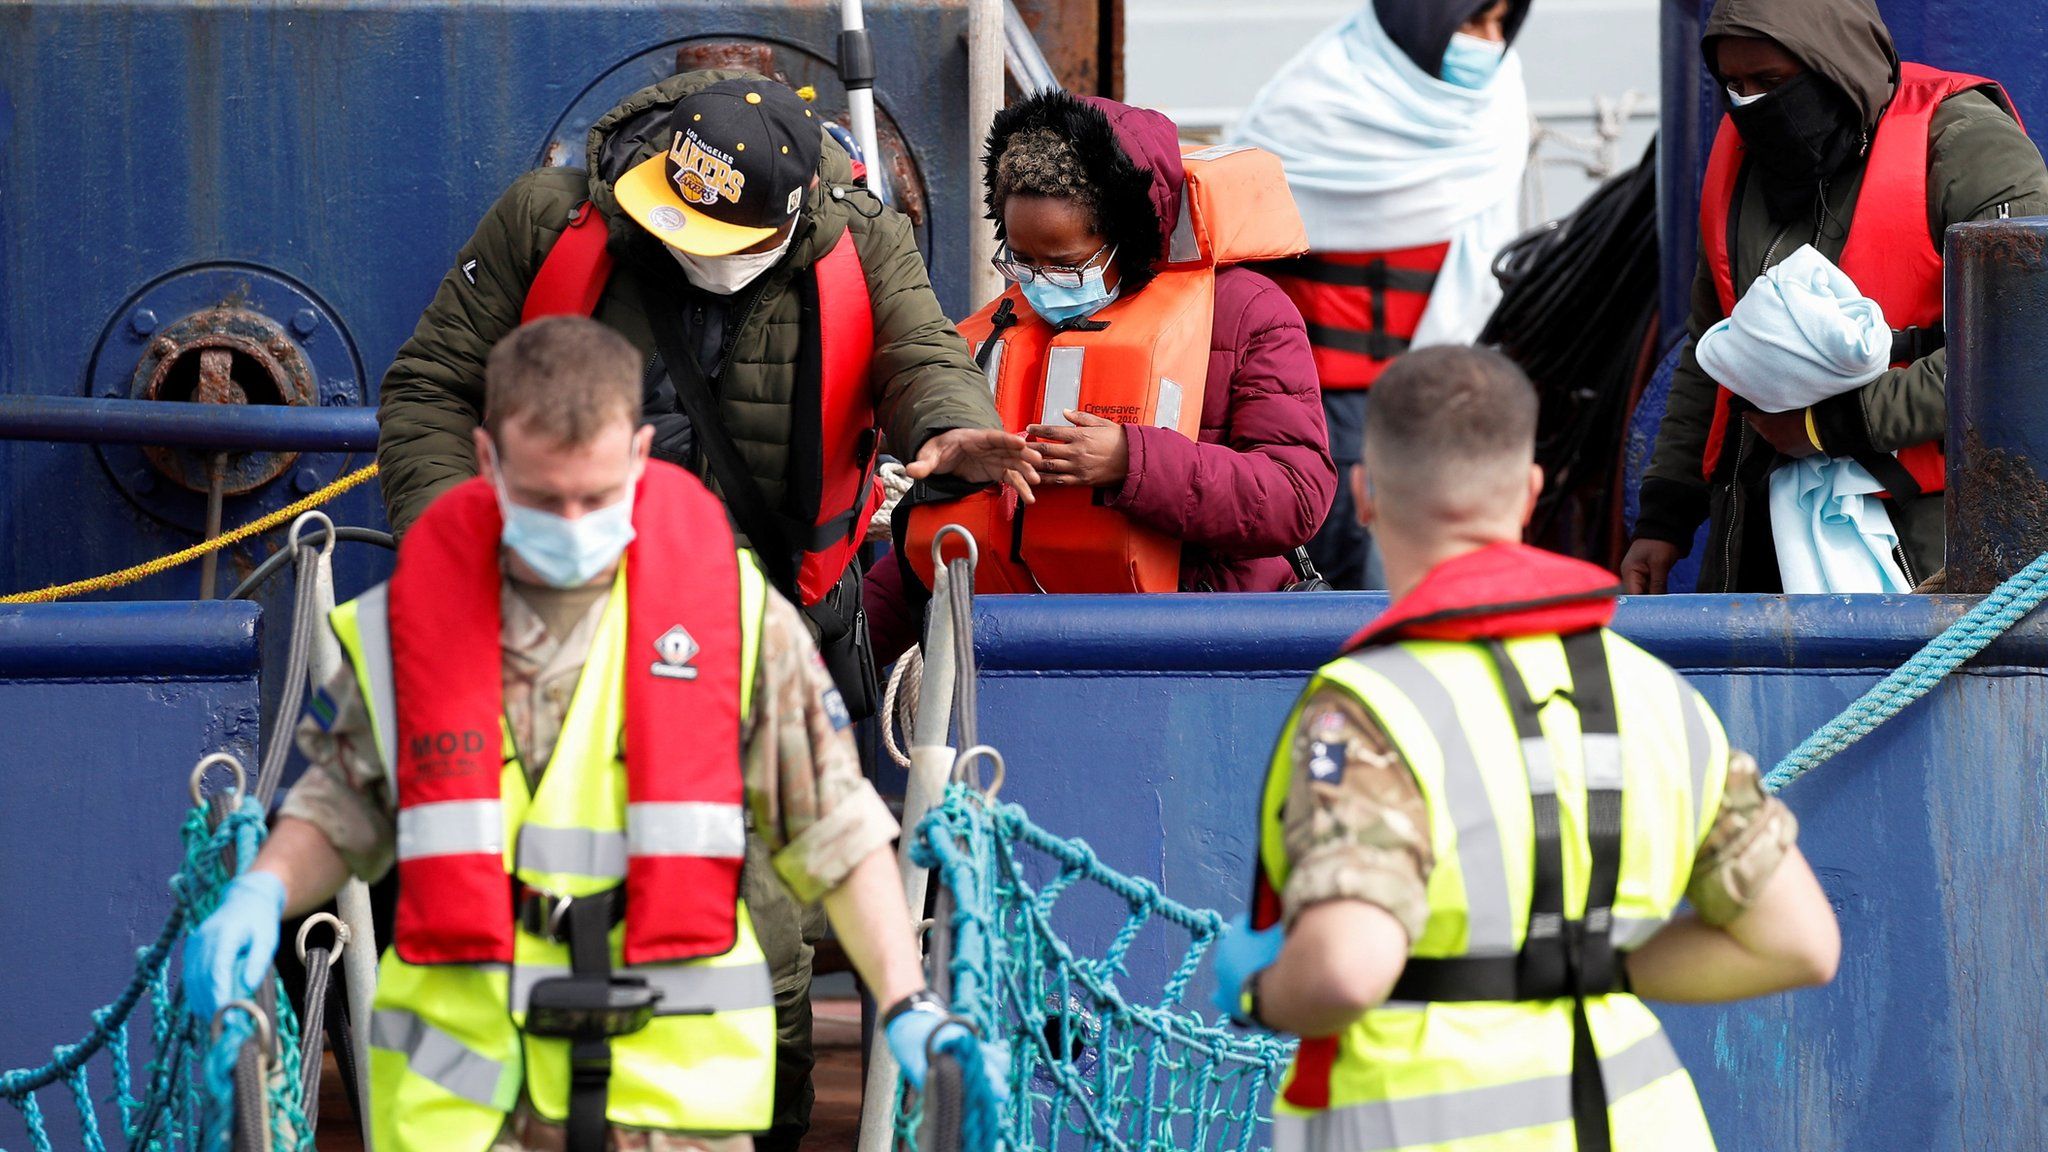 Migrants arrive in Dover on Thursday after being rescued while crossing the English Channel